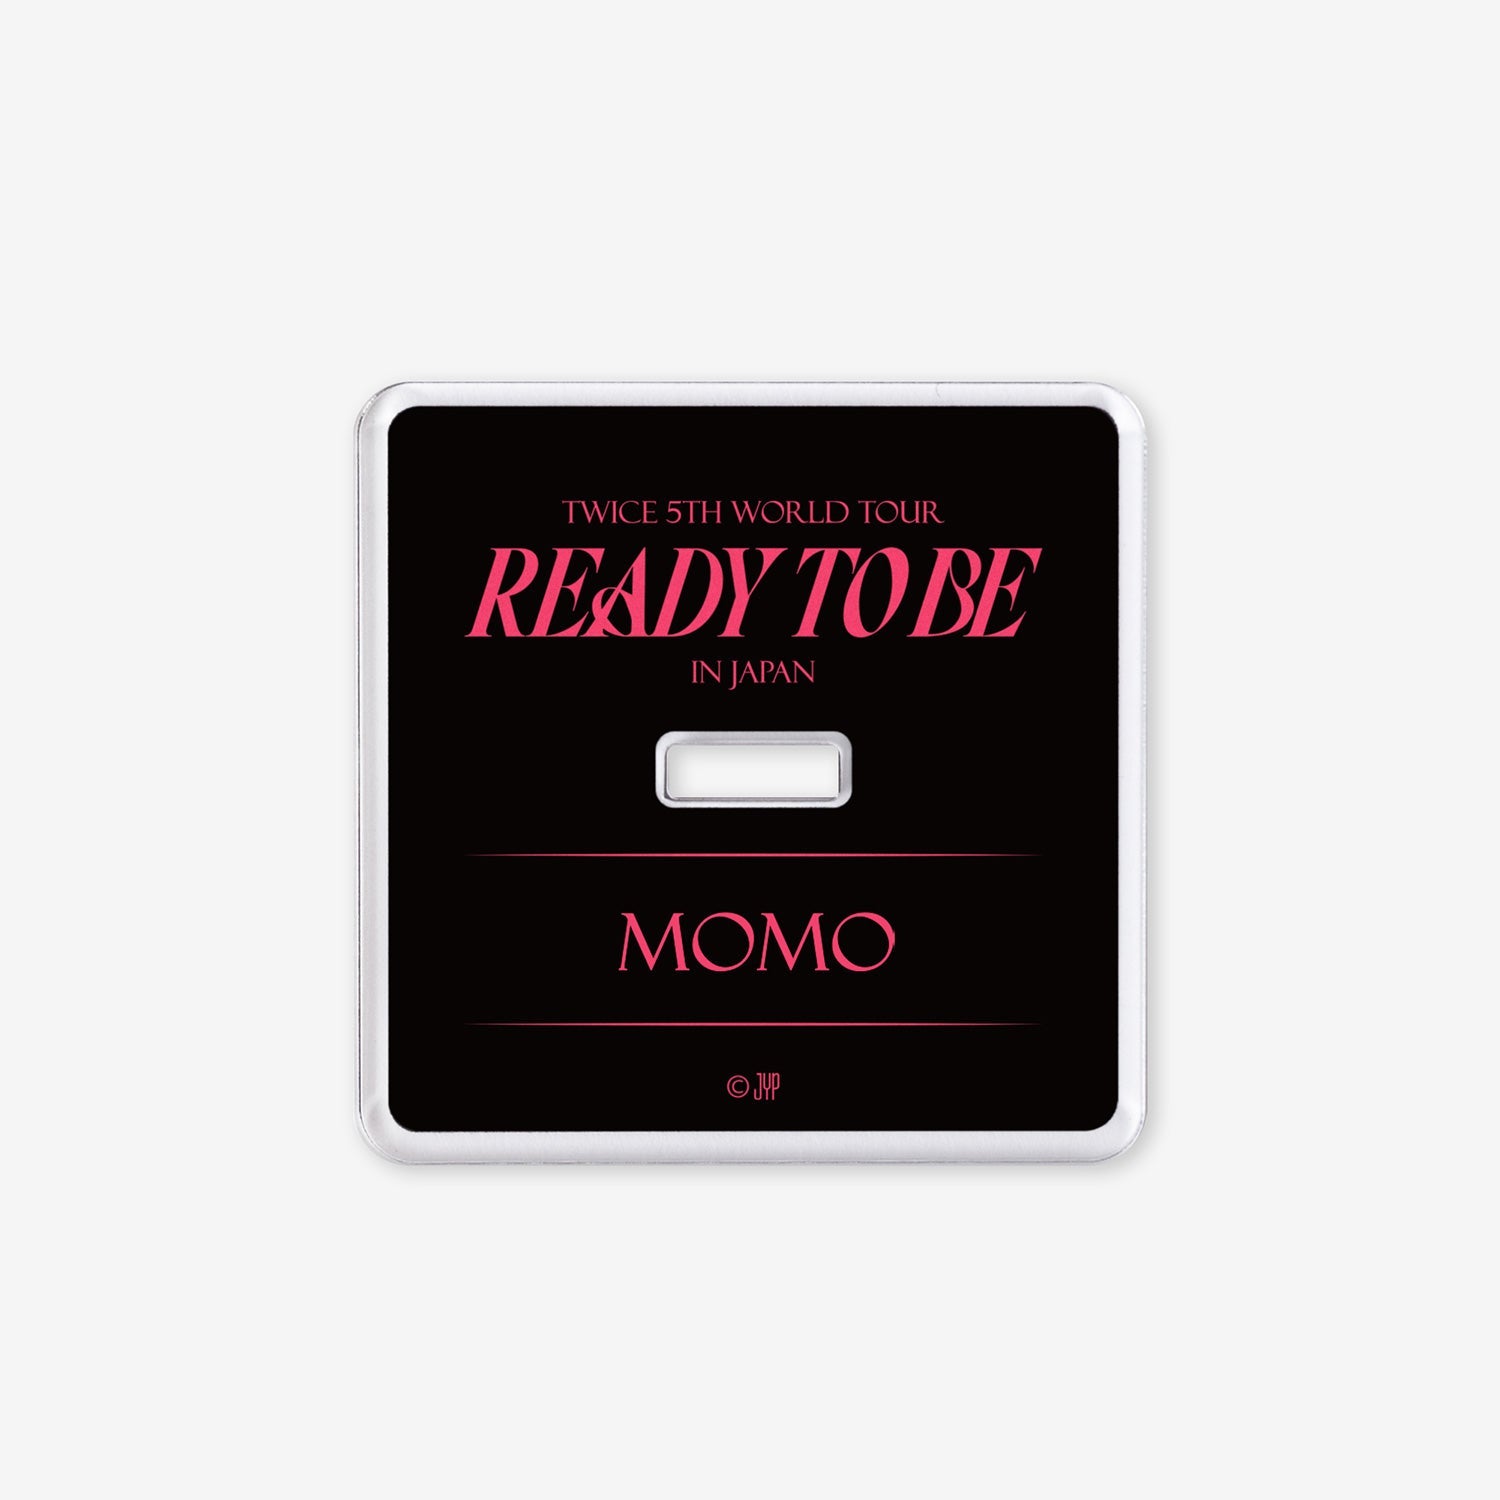 ACRYLIC STAND - MOMO【DOME】/ TWICE『READY TO BE』